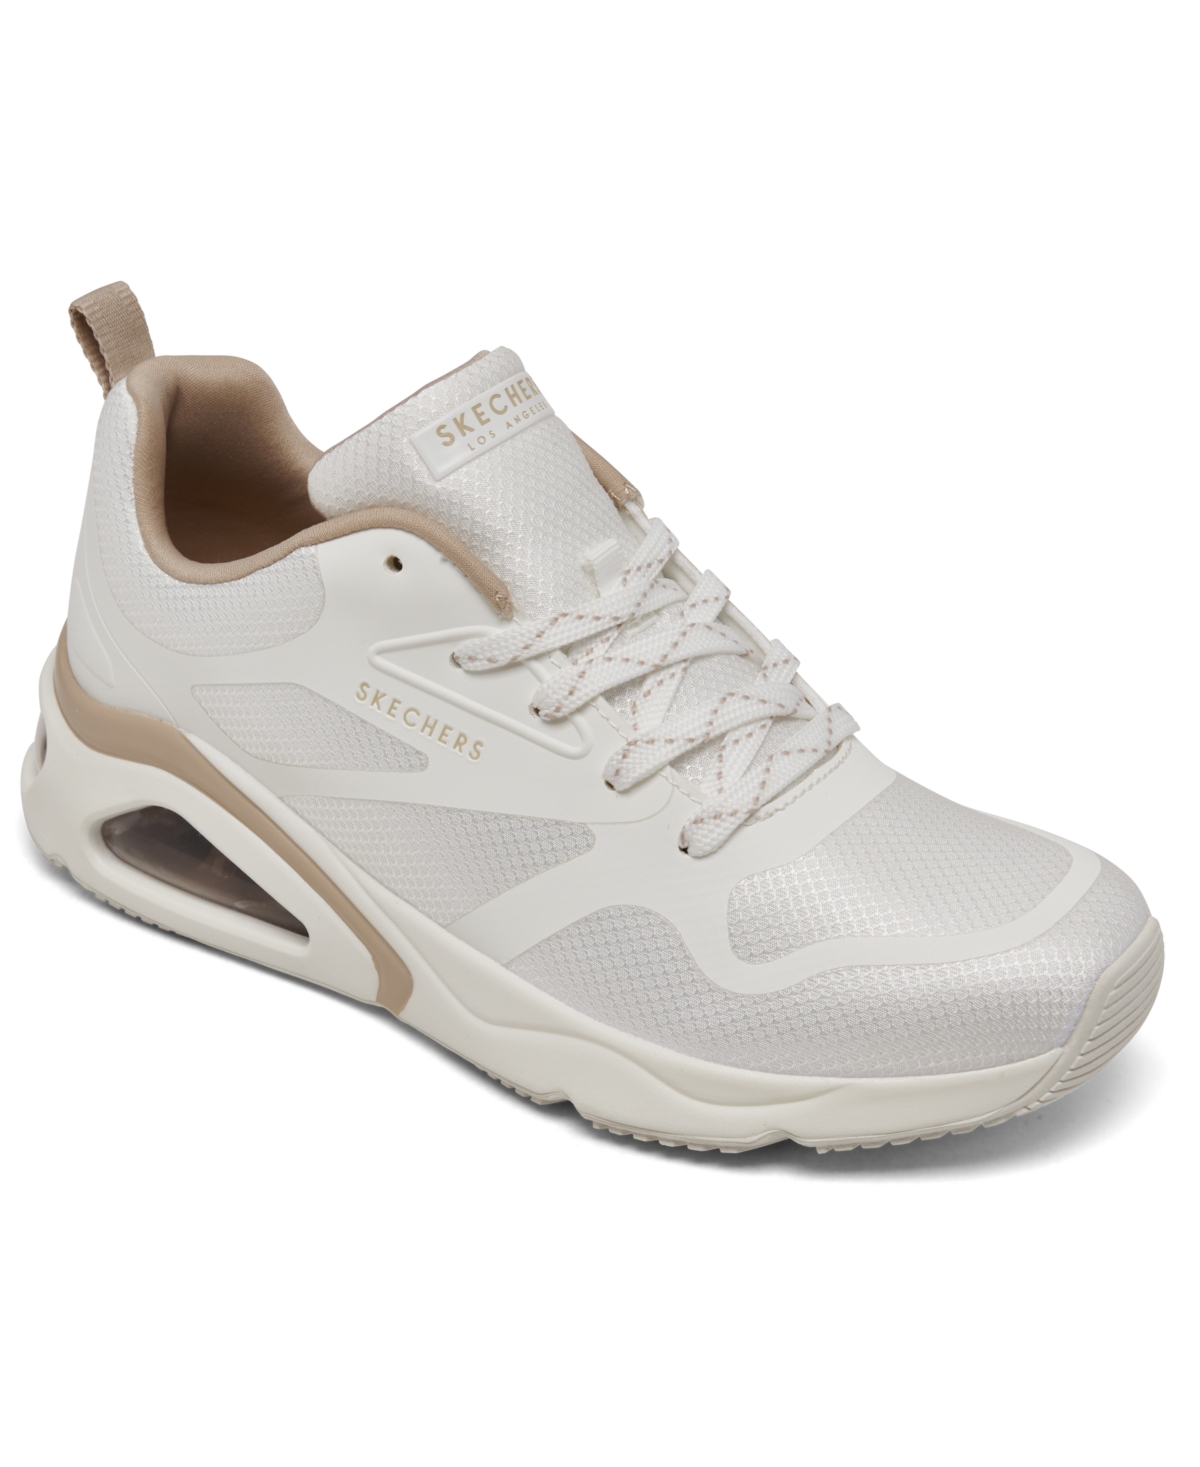 Street Women's Tres-Air Uno - Modern Affair Casual Sneakers from Finish Line - White